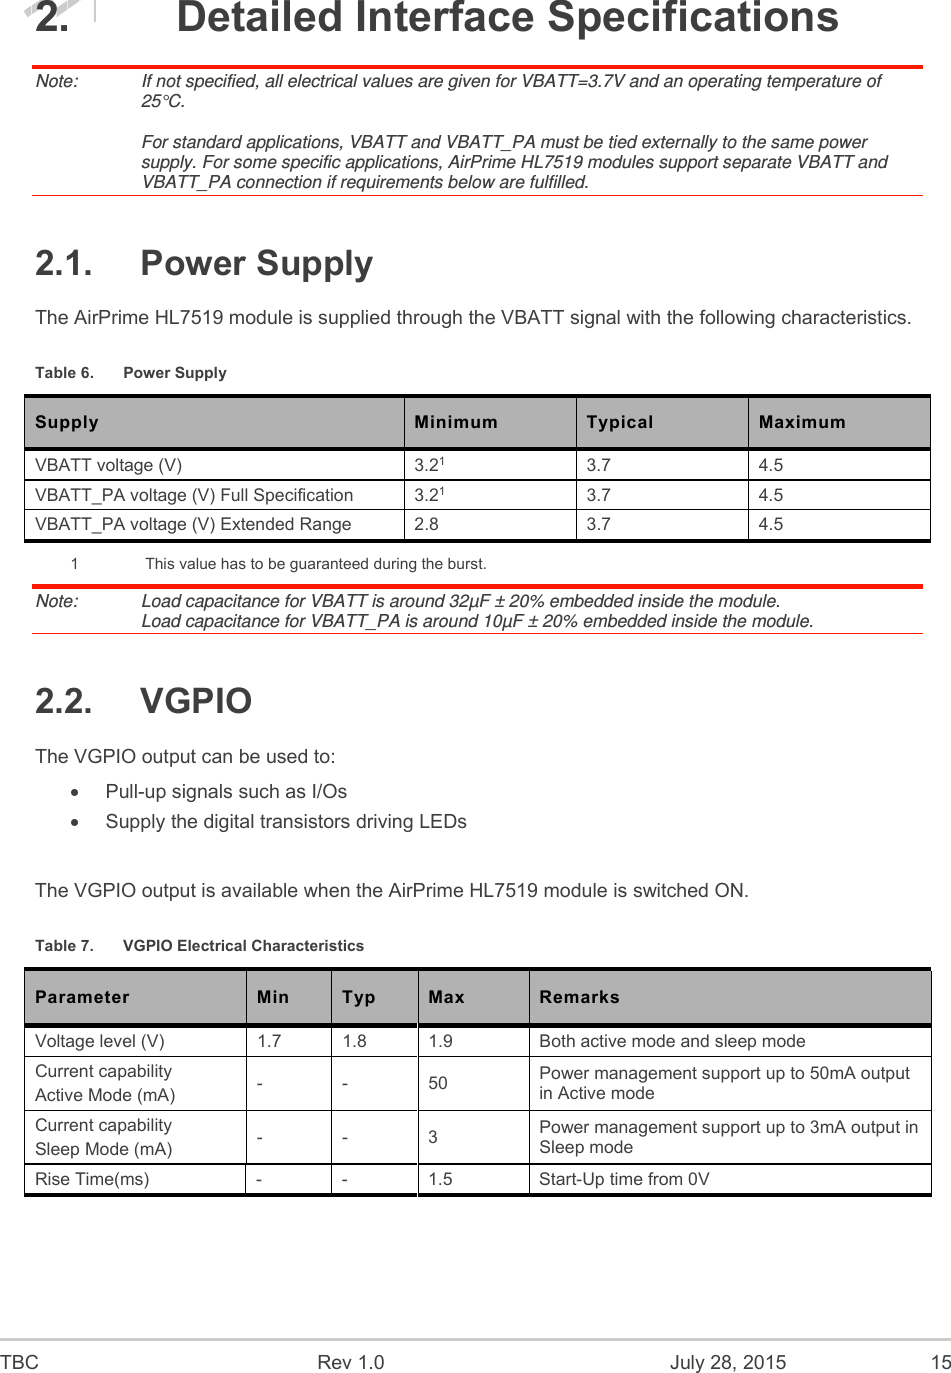  TBC  Rev 1.0  July 28, 2015  15 2.  Detailed Interface Specifications Note:   If not specified, all electrical values are given for VBATT=3.7V and an operating temperature of 25°C.  For standard applications, VBATT and VBATT_PA must be tied externally to the same power supply. For some specific applications, AirPrime HL7519 modules support separate VBATT and VBATT_PA connection if requirements below are fulfilled. 2.1.  Power Supply The AirPrime HL7519 module is supplied through the VBATT signal with the following characteristics. Table 6.  Power Supply Supply  Minimum  Typical  Maximum VBATT voltage (V)  3.21 3.7  4.5 VBATT_PA voltage (V) Full Specification  3.21 3.7  4.5 VBATT_PA voltage (V) Extended Range  2.8  3.7  4.5 1  This value has to be guaranteed during the burst. Note:   Load capacitance for VBATT is around 32µF ± 20% embedded inside the module. Load capacitance for VBATT_PA is around 10µF ± 20% embedded inside the module. 2.2.  VGPIO The VGPIO output can be used to:   Pull-up signals such as I/Os   Supply the digital transistors driving LEDs  The VGPIO output is available when the AirPrime HL7519 module is switched ON. Table 7.  VGPIO Electrical Characteristics Parameter  Min  Typ  Max  Remarks Voltage level (V)  1.7  1.8  1.9  Both active mode and sleep mode Current capability Active Mode (mA)  -  -  50  Power management support up to 50mA output in Active mode Current capability Sleep Mode (mA)  -  -  3  Power management support up to 3mA output in Sleep mode Rise Time(ms)  -  -  1.5  Start-Up time from 0V 